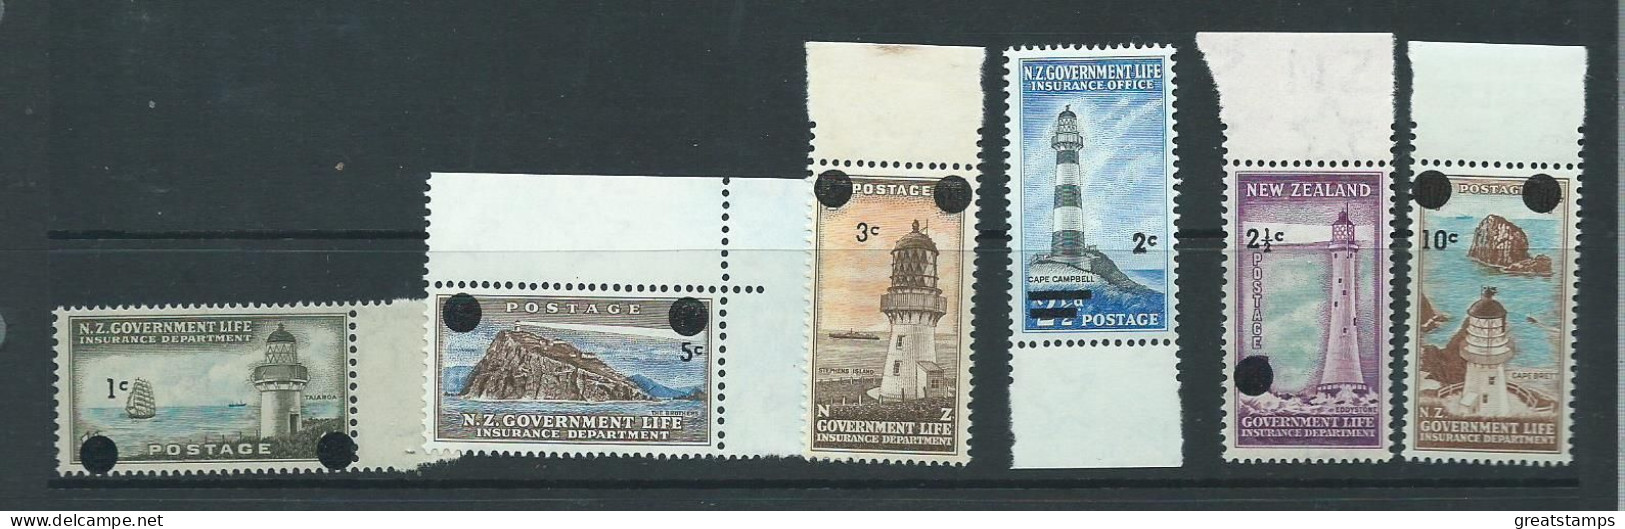 New Zealand Stamps Life Insurance Lighthouse1967 Mnh Set Surcharges - Nuovi